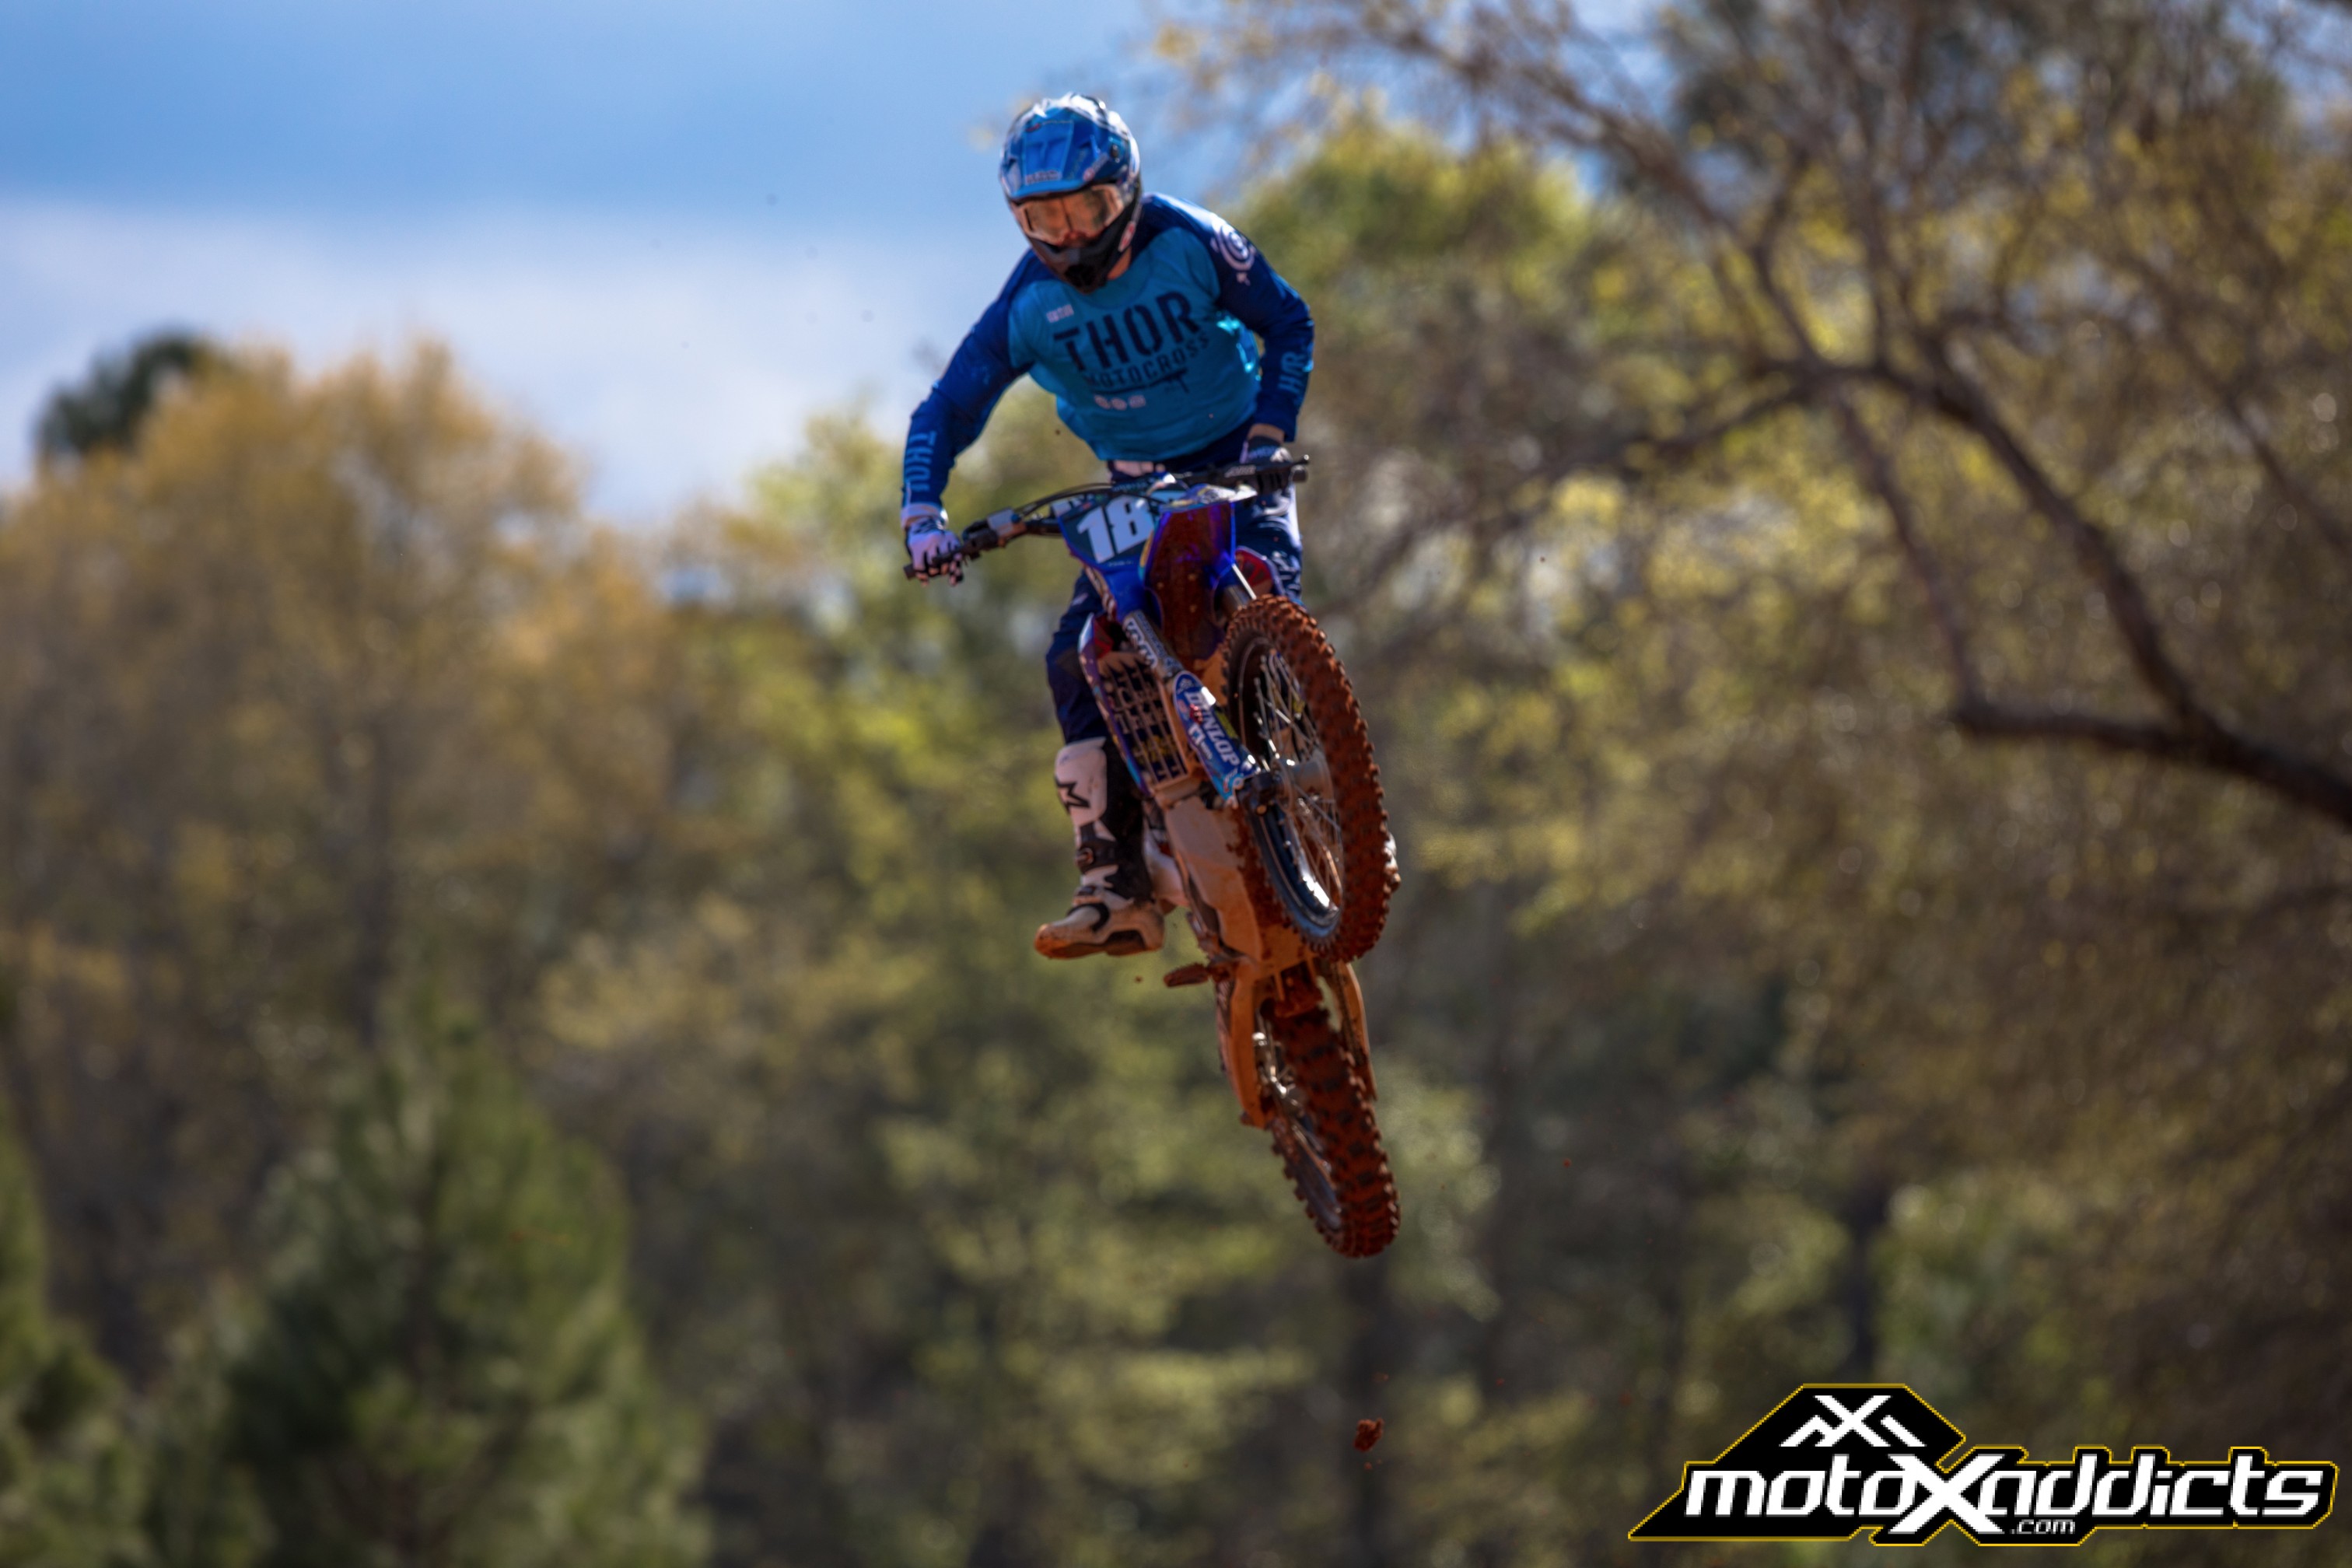 Chase Yocom was out at the original MTF a couple days ago and snapped some shots of Lorenzo training for Indianapolis. 